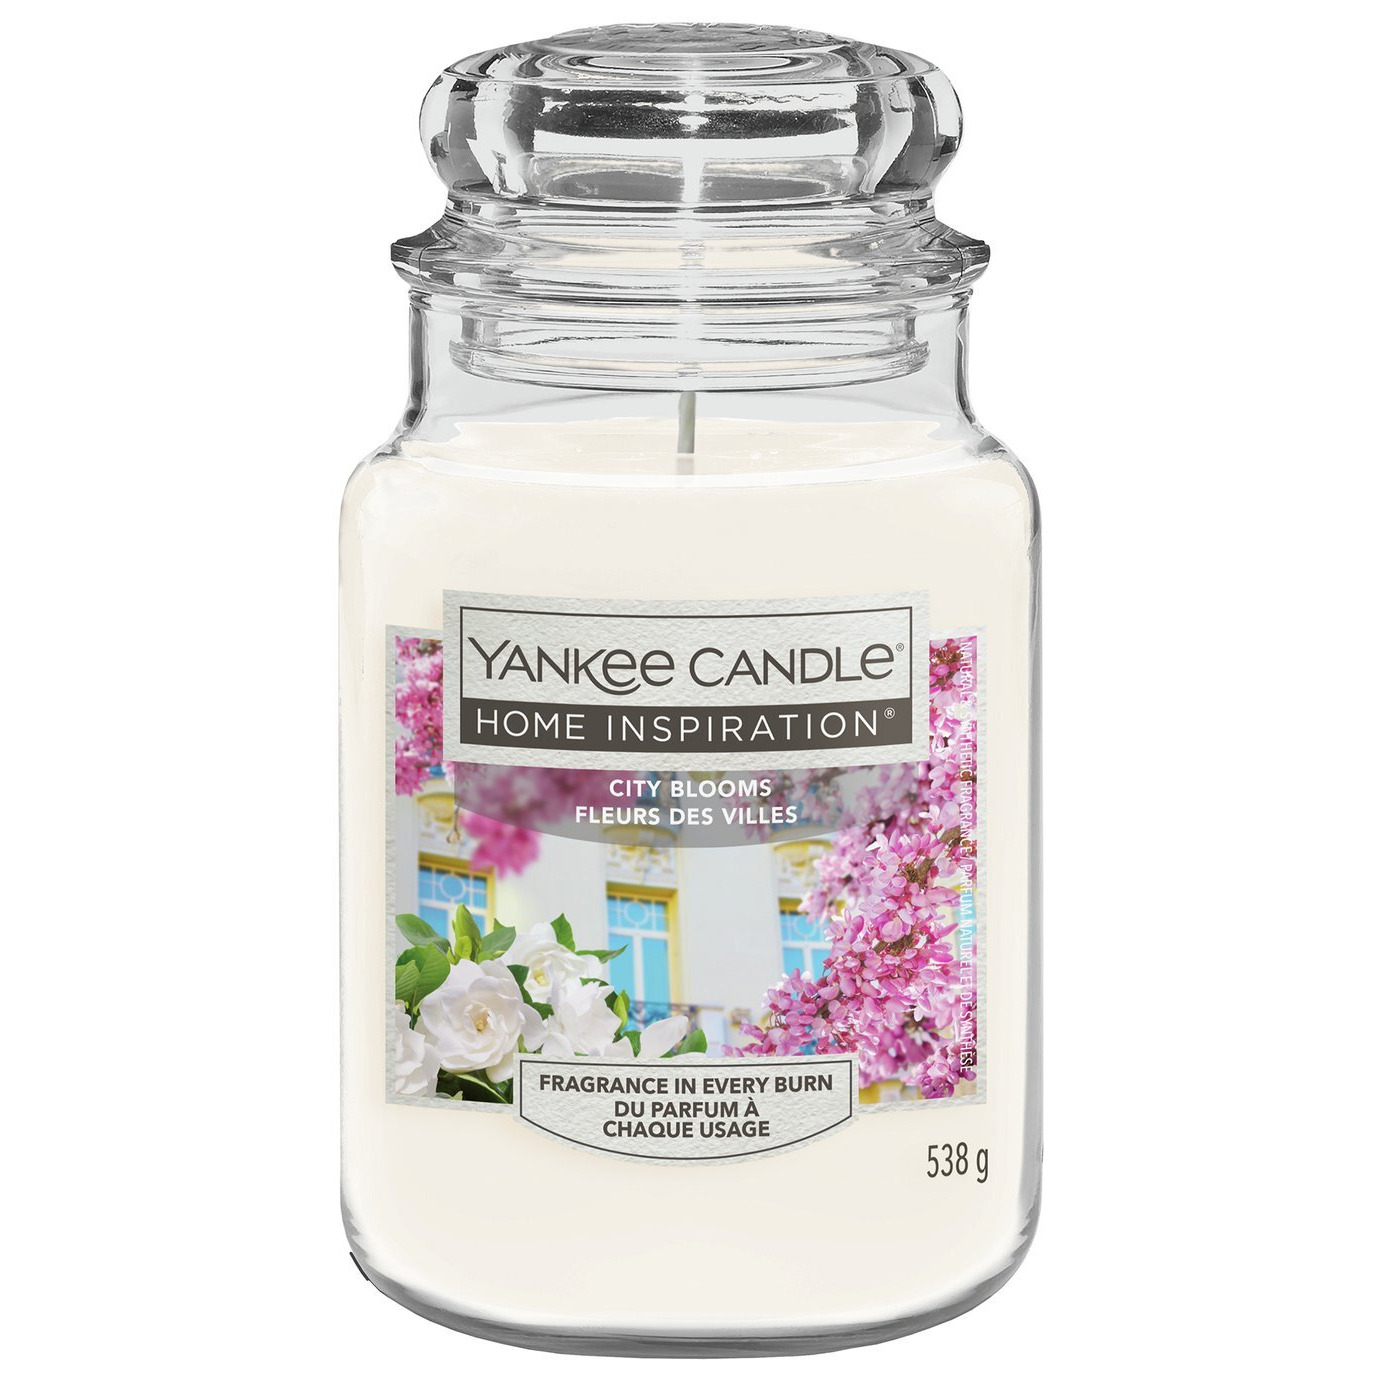 Yankee Home Inspiration Large Jar Candle - City Blooms - image 1